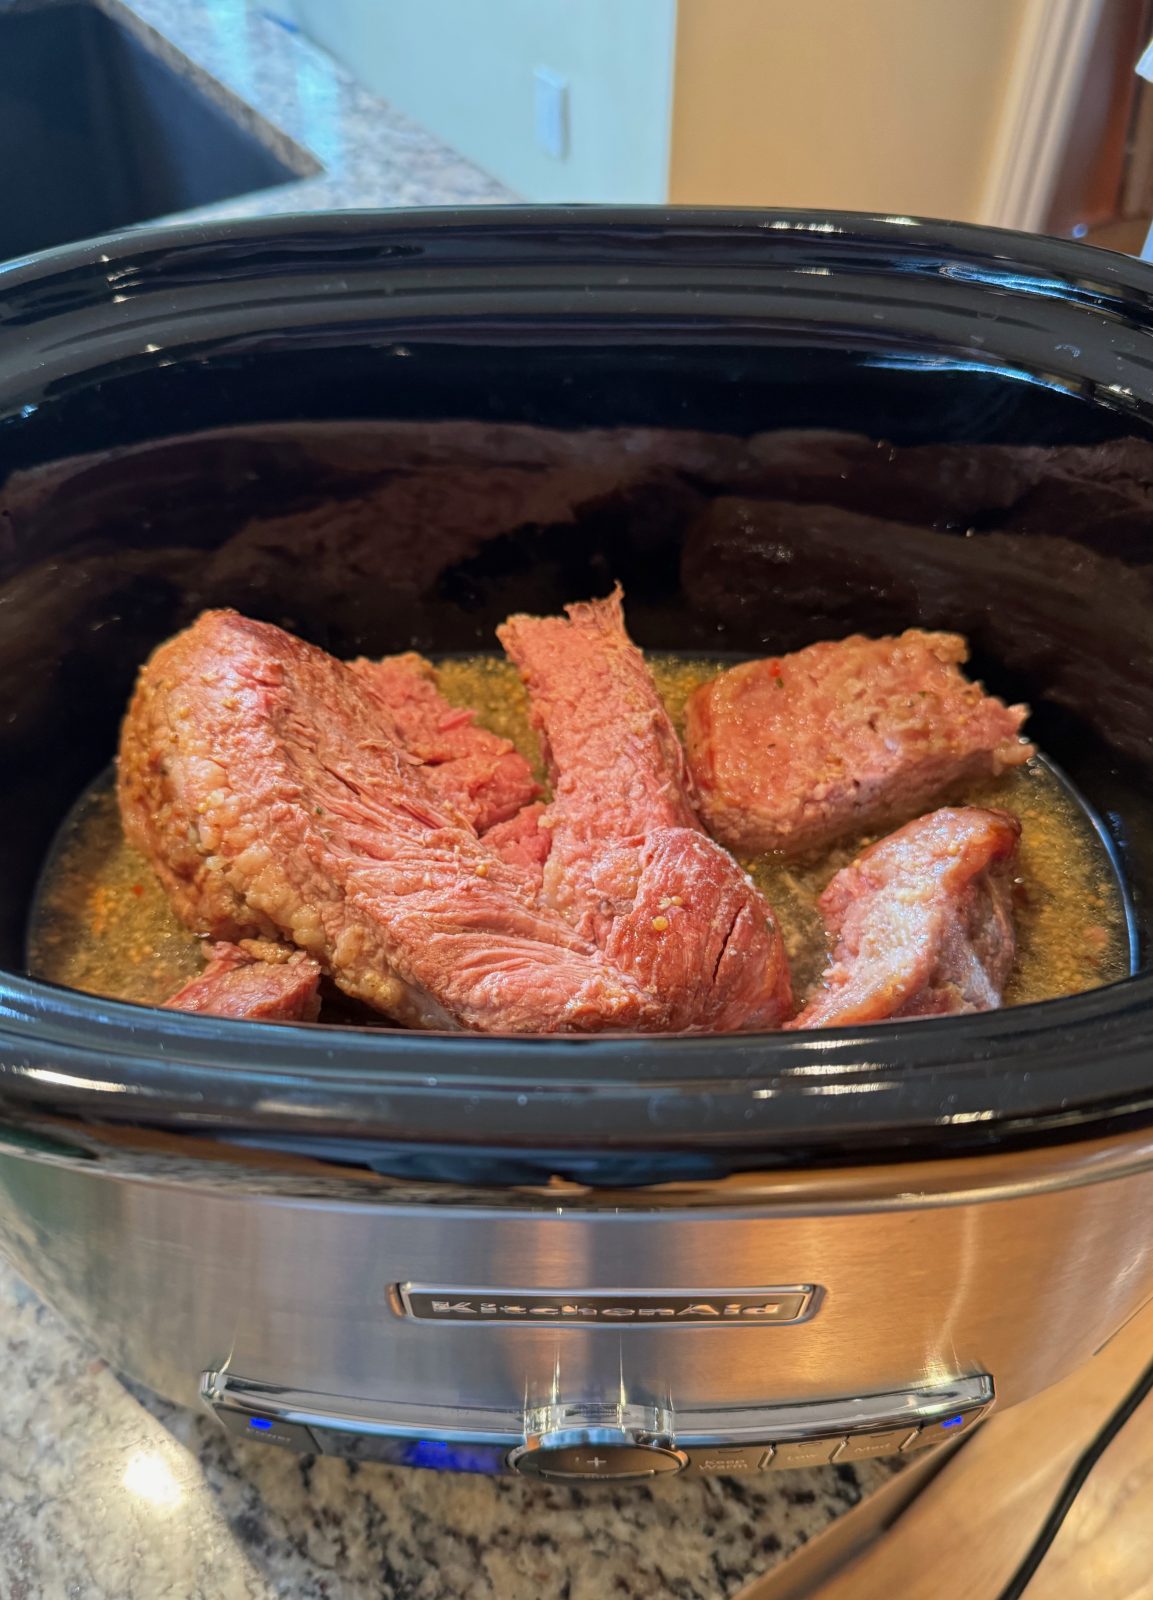 KitchenAid Slow Cooker on a a granite kitchen countertop with pieces of cooked corned beef in braising liquid.  Getting ready to make Slow Cooker Reuben Dip
